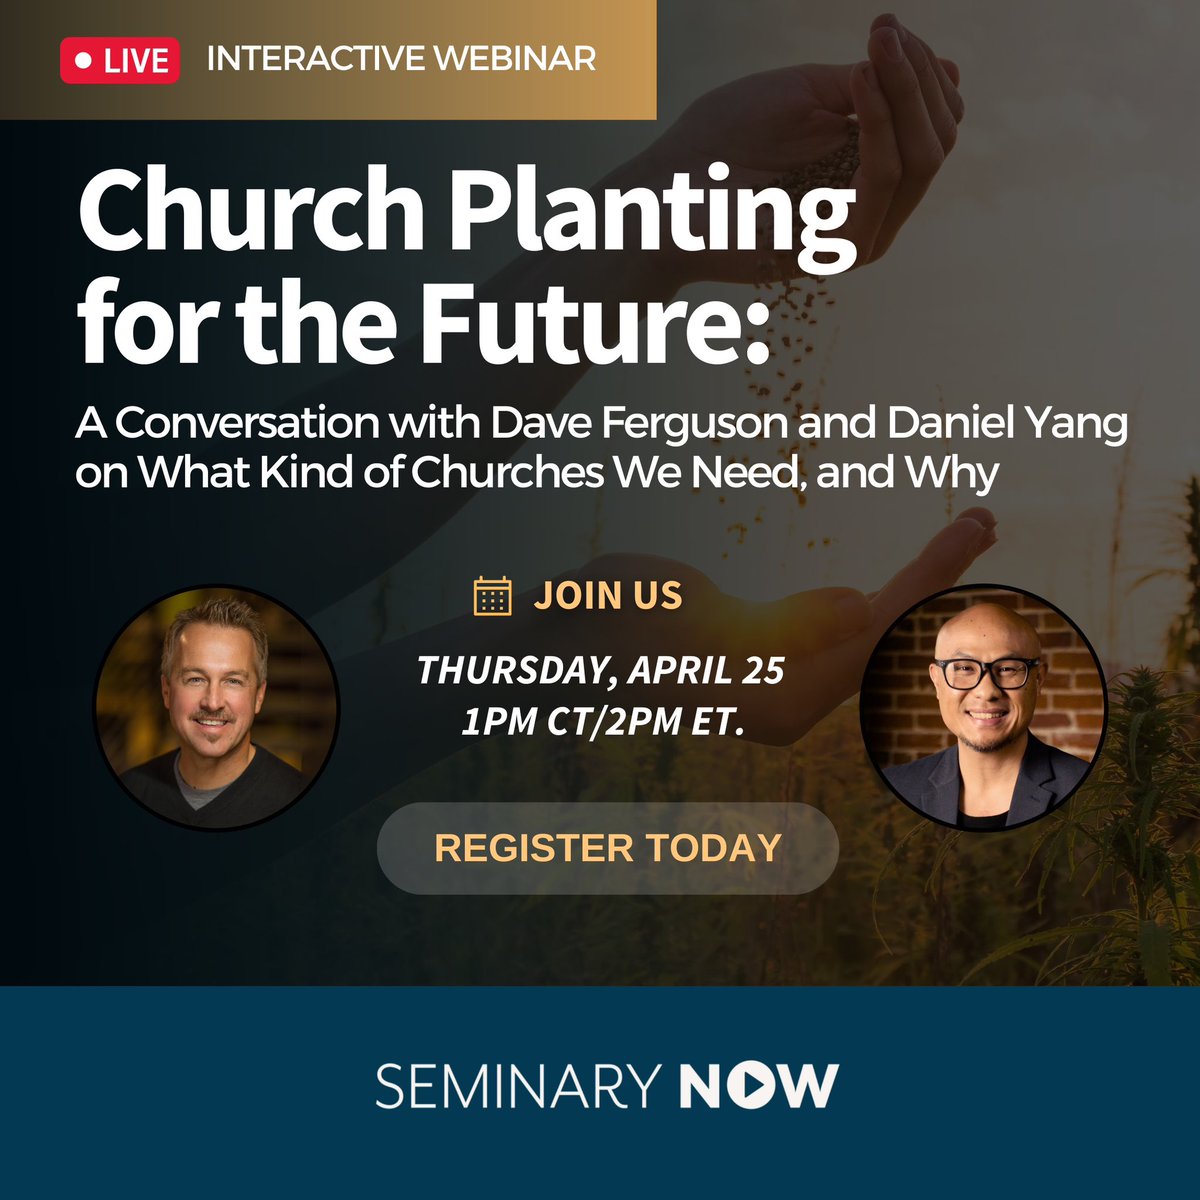 I will just be returning from being with church planters in Africa and can’t wait to discuss my observations with you and Daniel Yang. Join us for this live and interactive webinar where we discuss the future of church planting. seminarynow.com/pages/church-p…